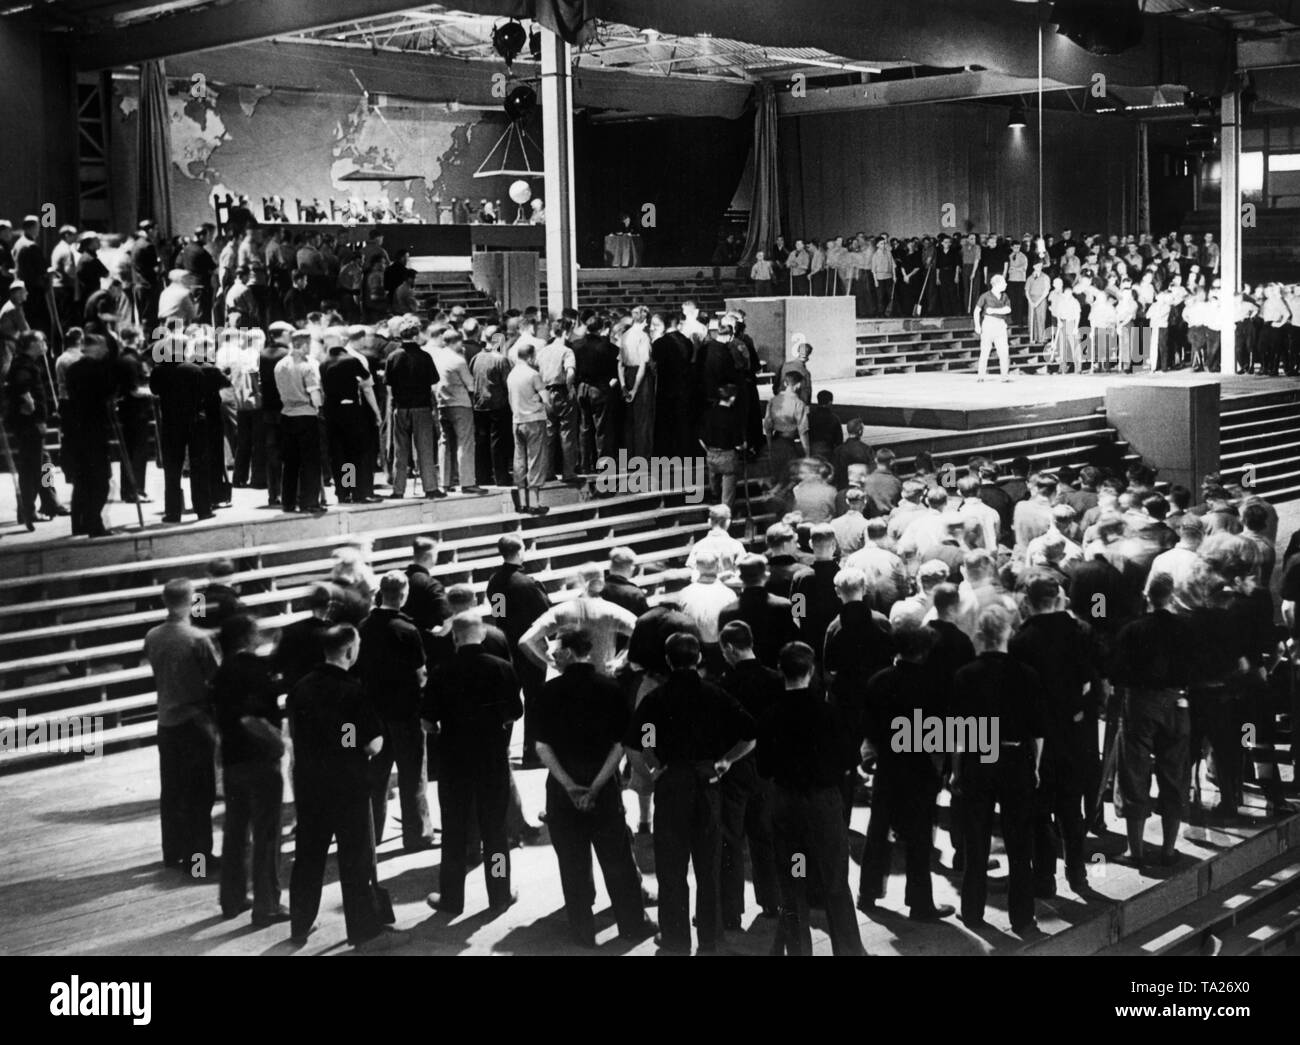 On the occasion of the first meeting of the Nazi organization 'Kraft durch Freude' ('Strength through Joy'), the theatrical performance 'Deutsche Heimkehr' ('German Homecoming') by Wilm Geyer is being performed in the Hanseatenhalle in Hamburg under the direction of Hellmuth Hansen and the participation of 2000 persons and 30 leading actors. Here, an excerpt from the 5th scene: In the background the conference of moneymakers with the symbolic scales in front of a world map. In the foreground the unemployed. Stock Photo